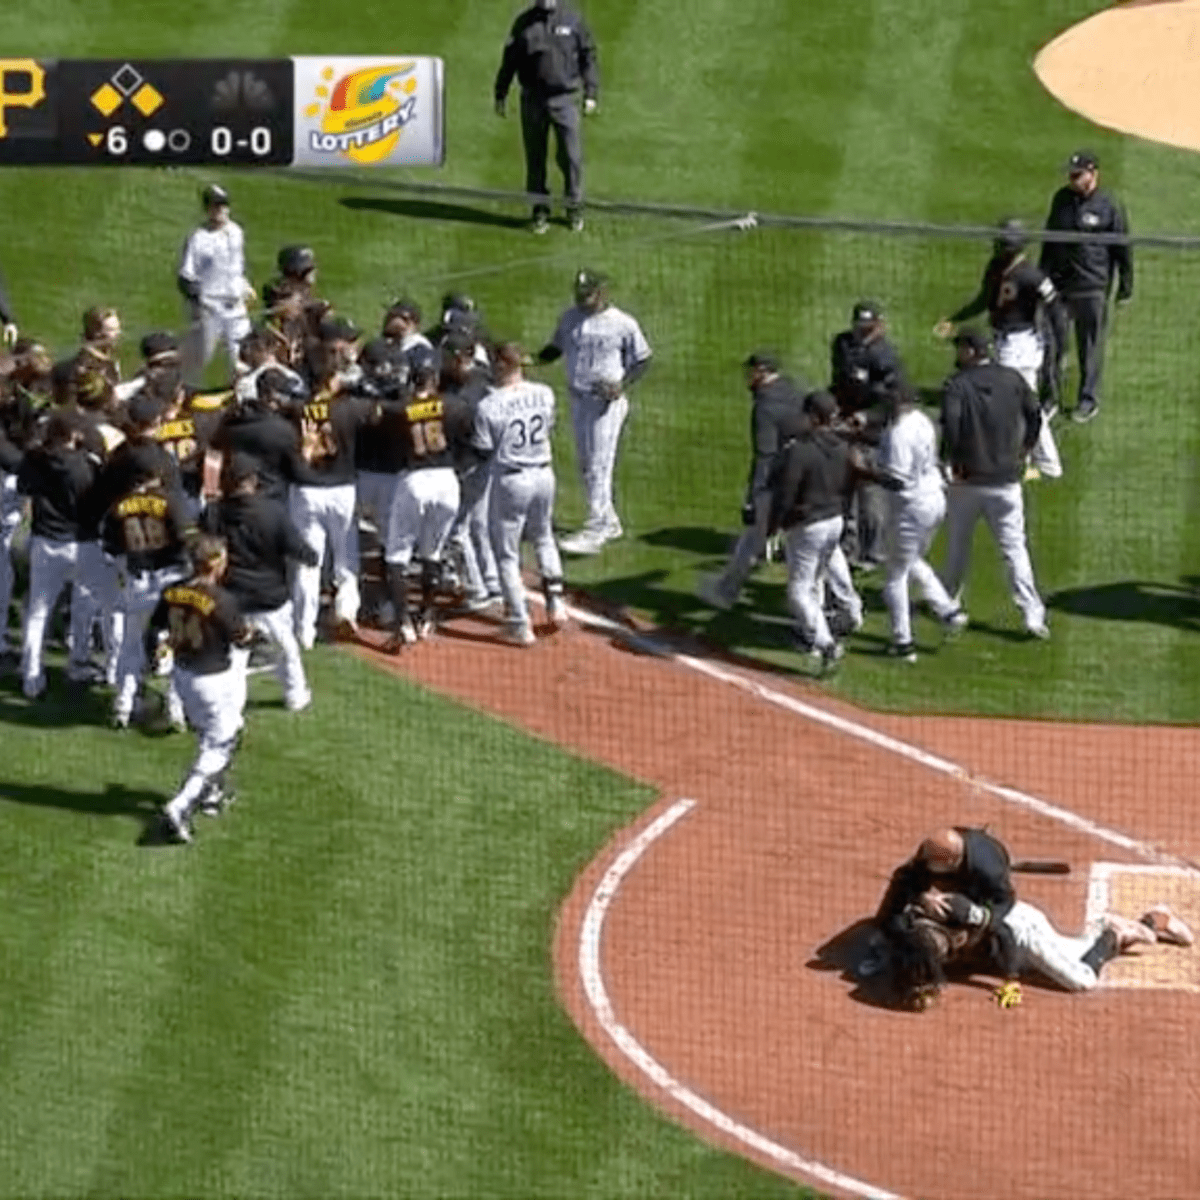 Loss of Oneil Cruz, frustration over play overshadows Pirates win against  White Sox